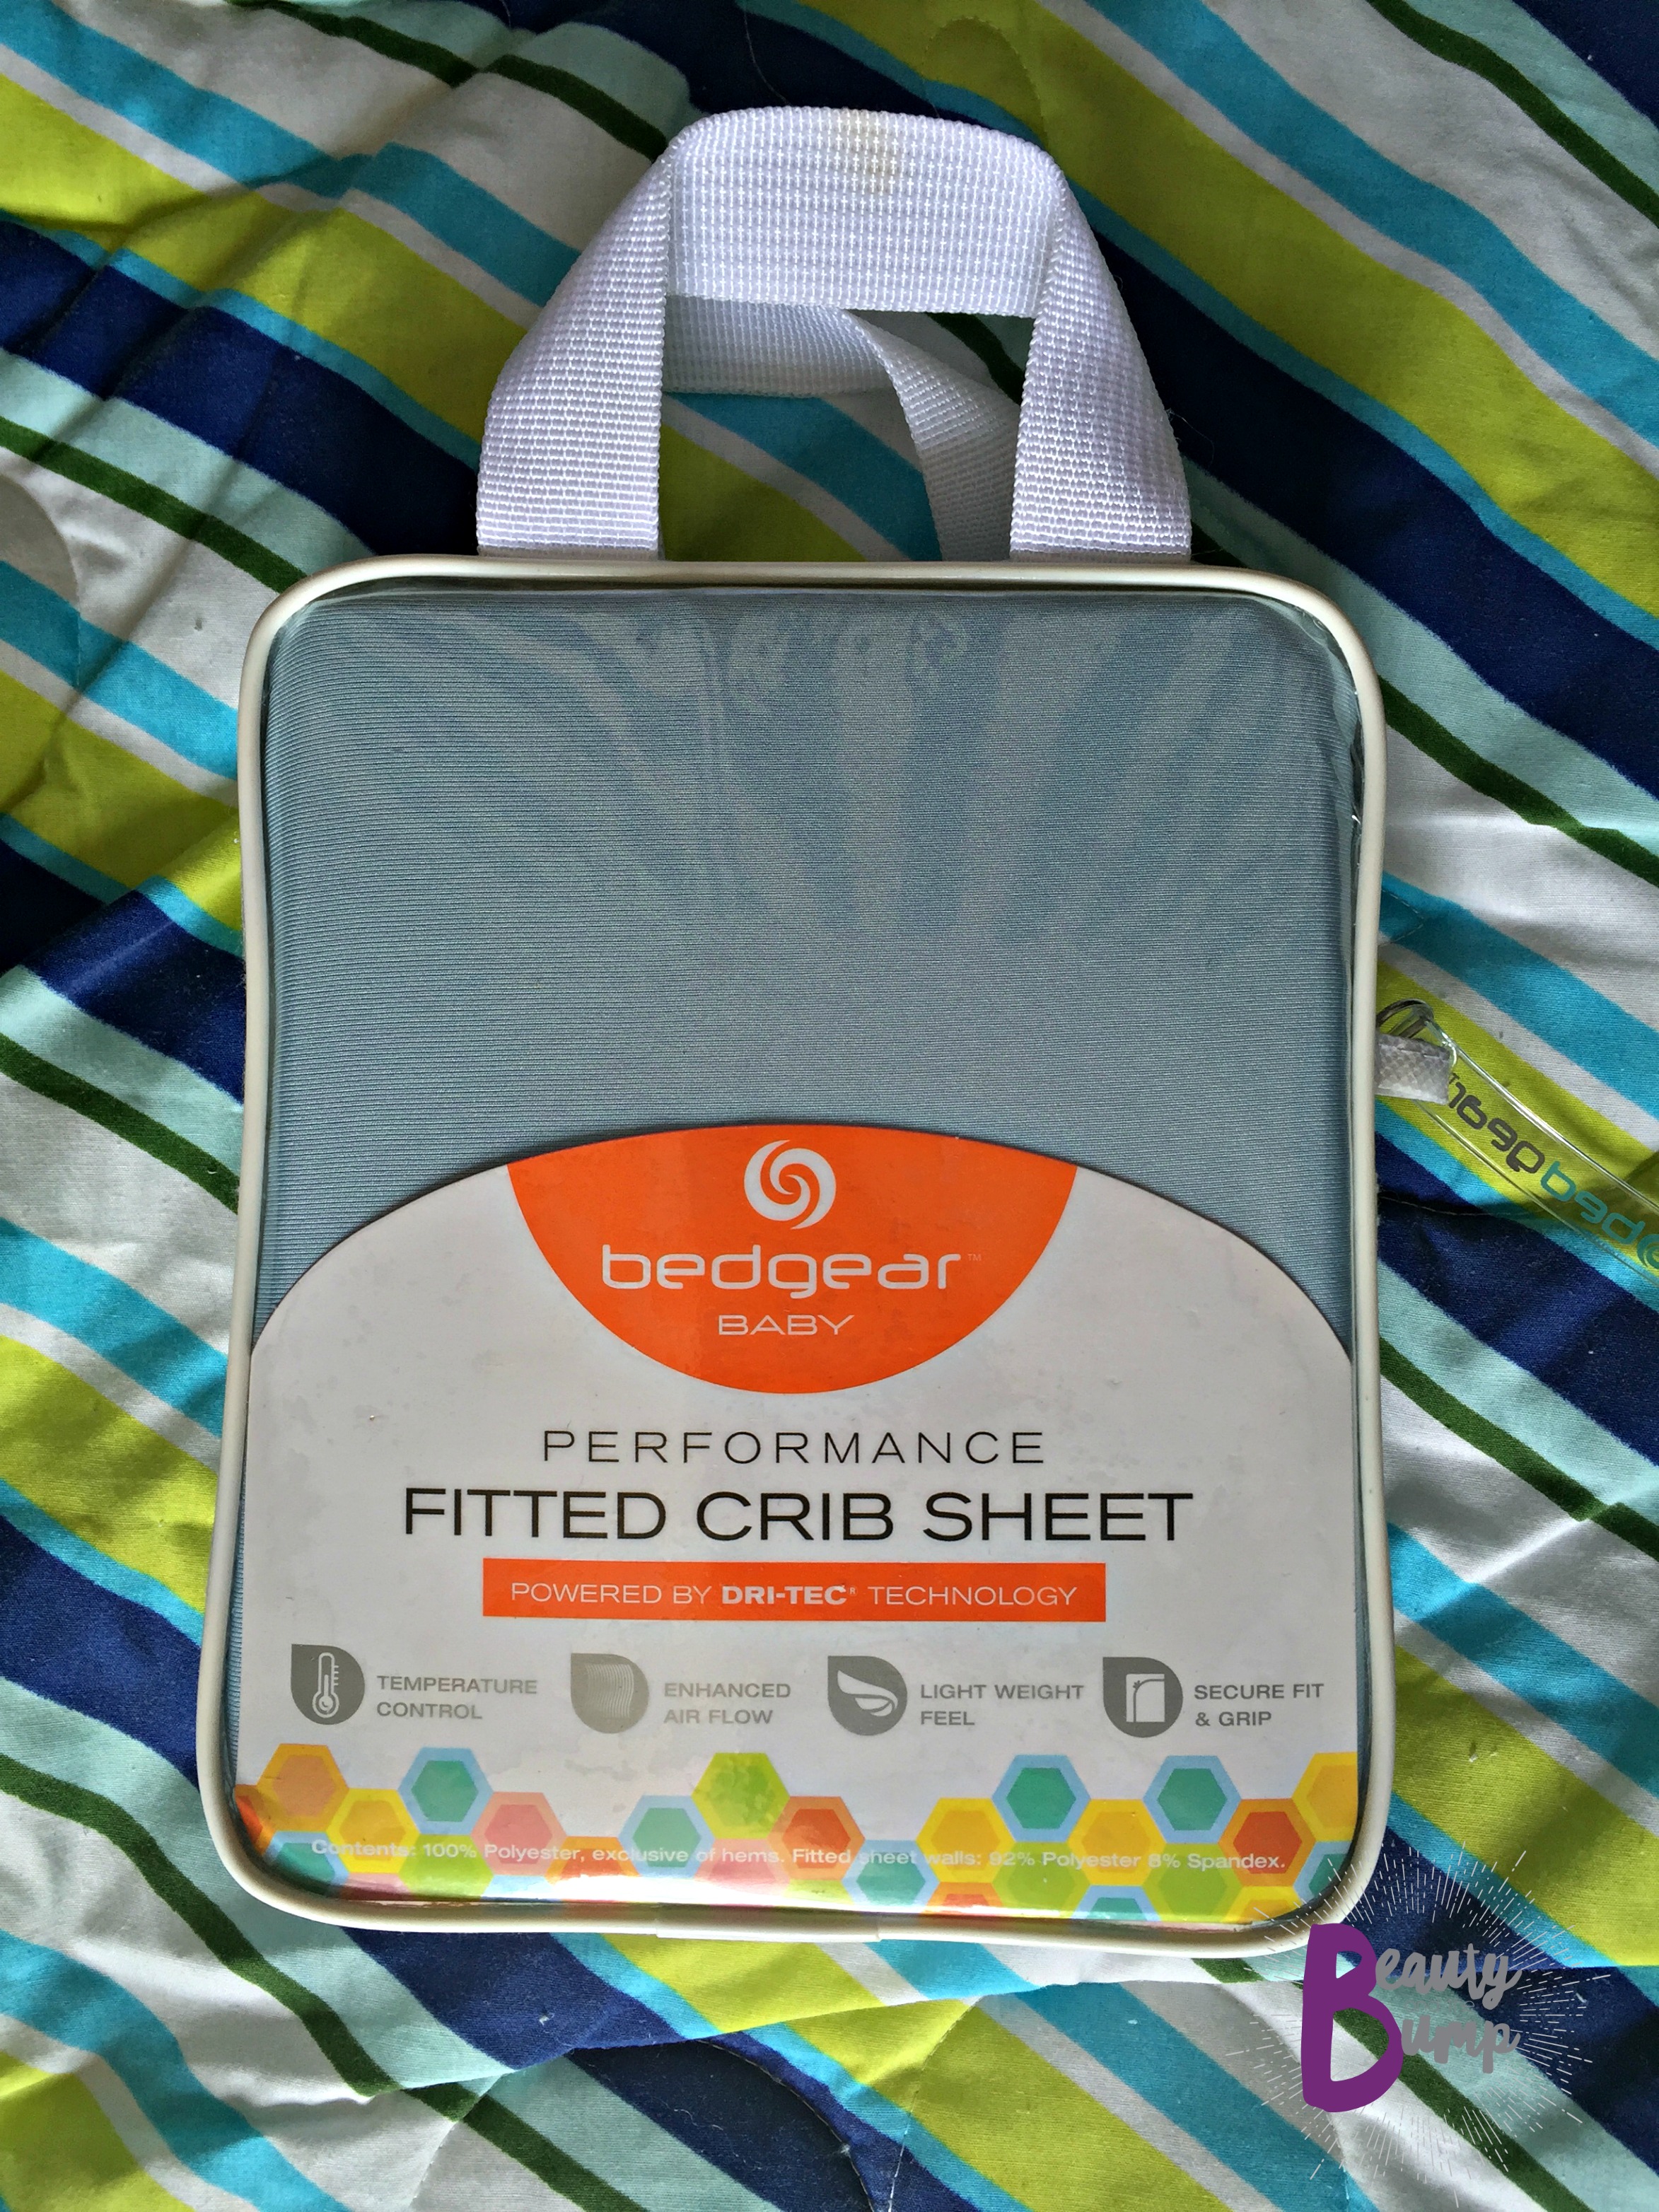 Bedgear Baby Performance Fitted Crib Sheet powered by DRI-TEC technology packaging